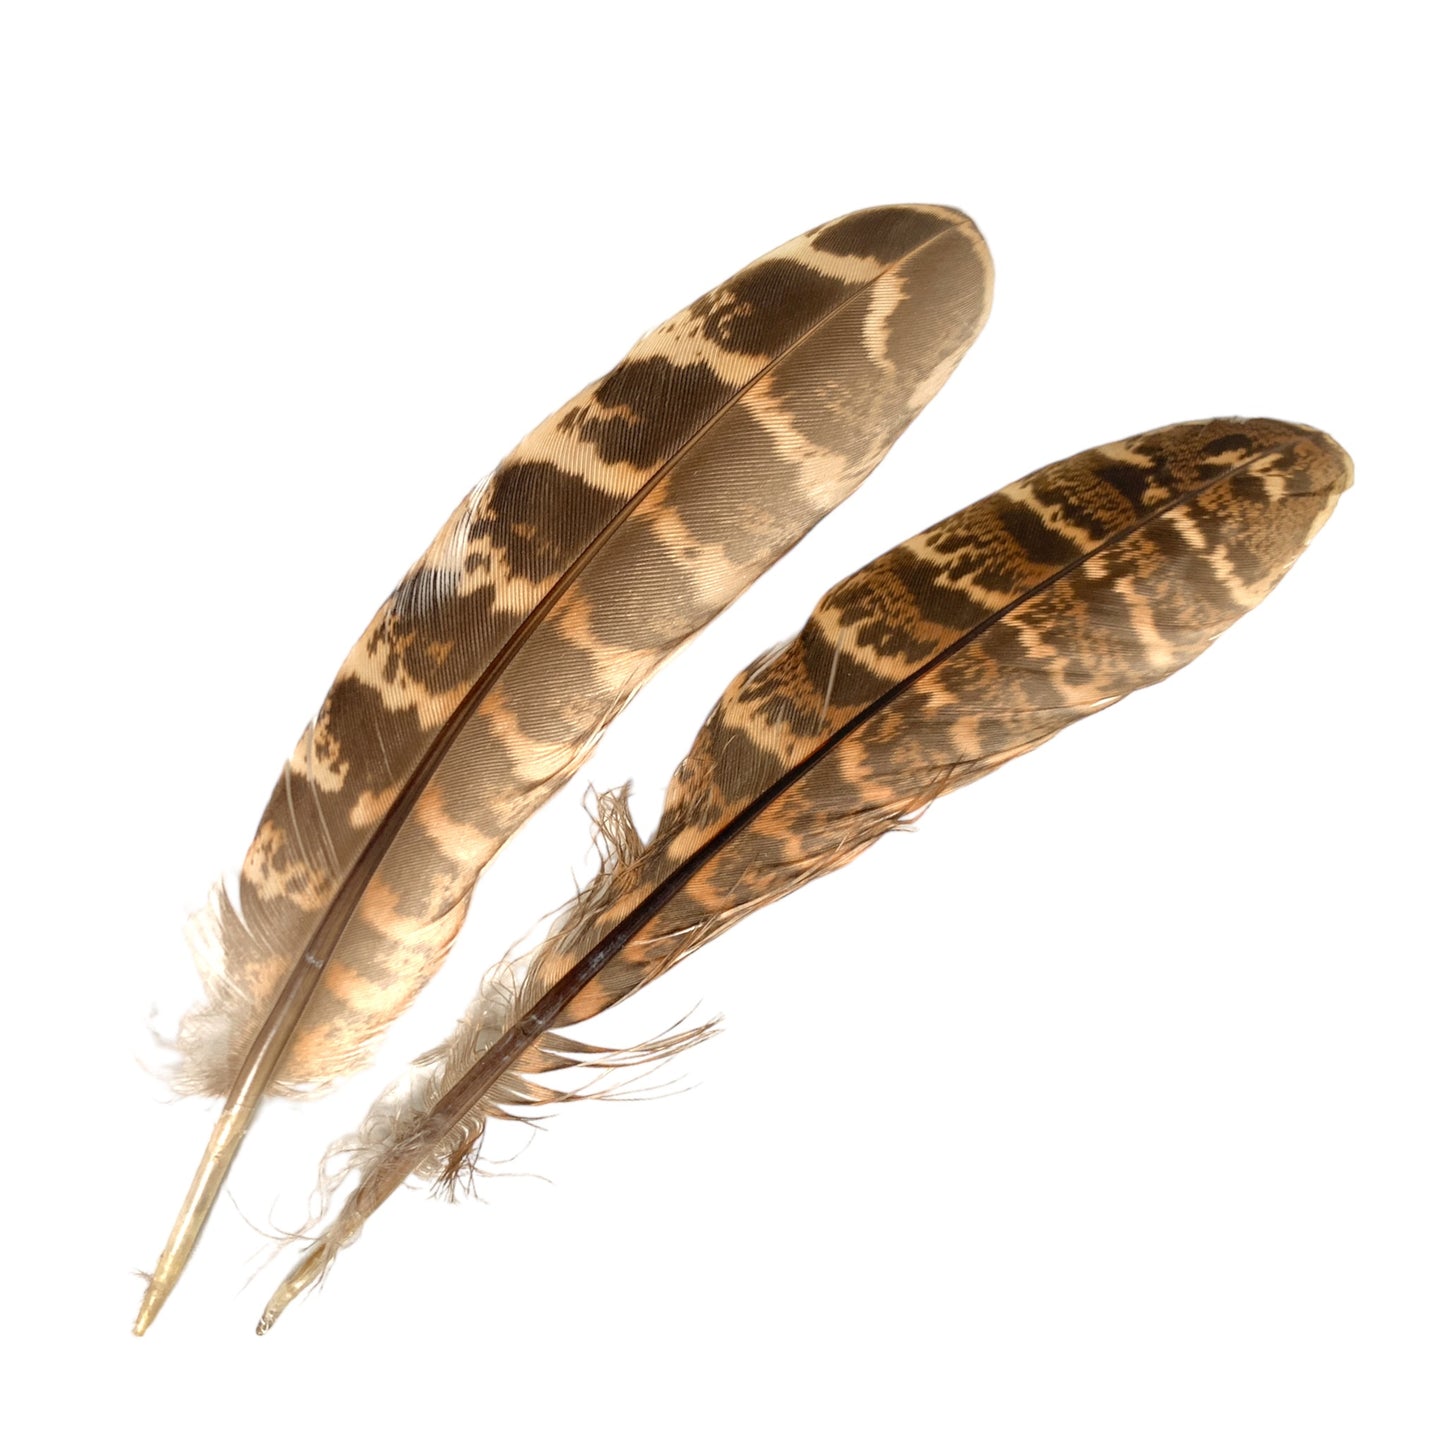 RINGNECK PHEASANT FEATHERS NATURAL 6 to 8 inch